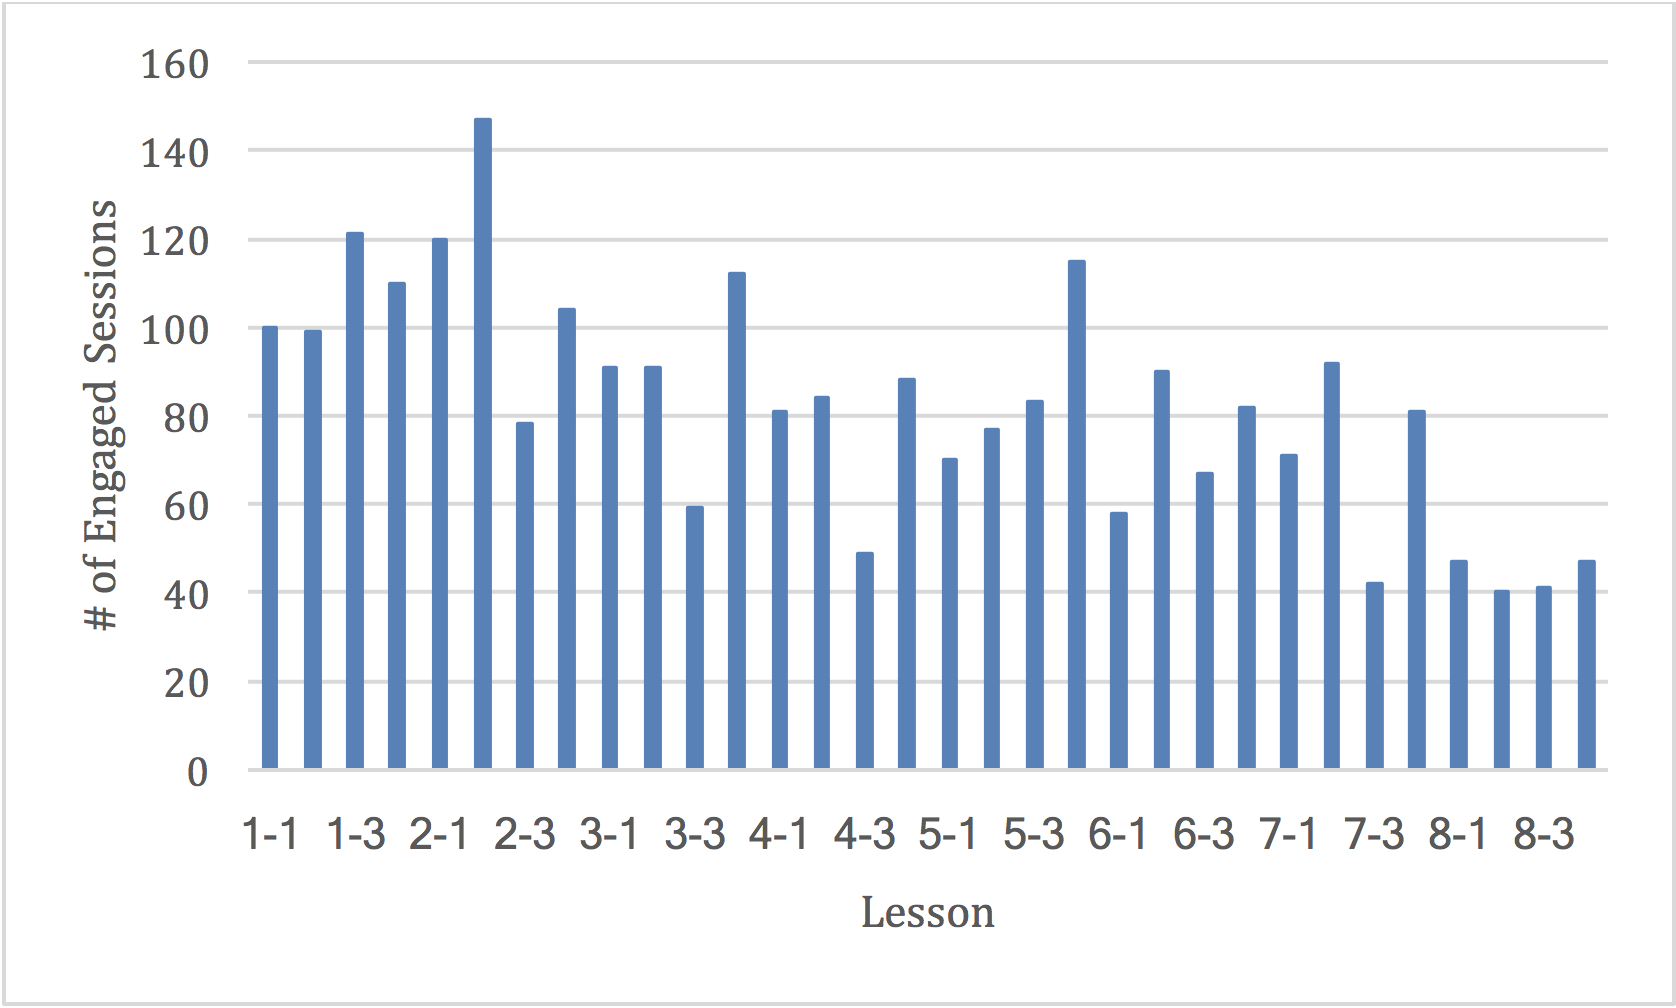 Bar graph of engaged sessions per lesson. Shows Session 2-2 as most engaged at roughly 150 engaged sessions. Lowest lesson engaged was 8-2 at approximately 40 engaged sessions.